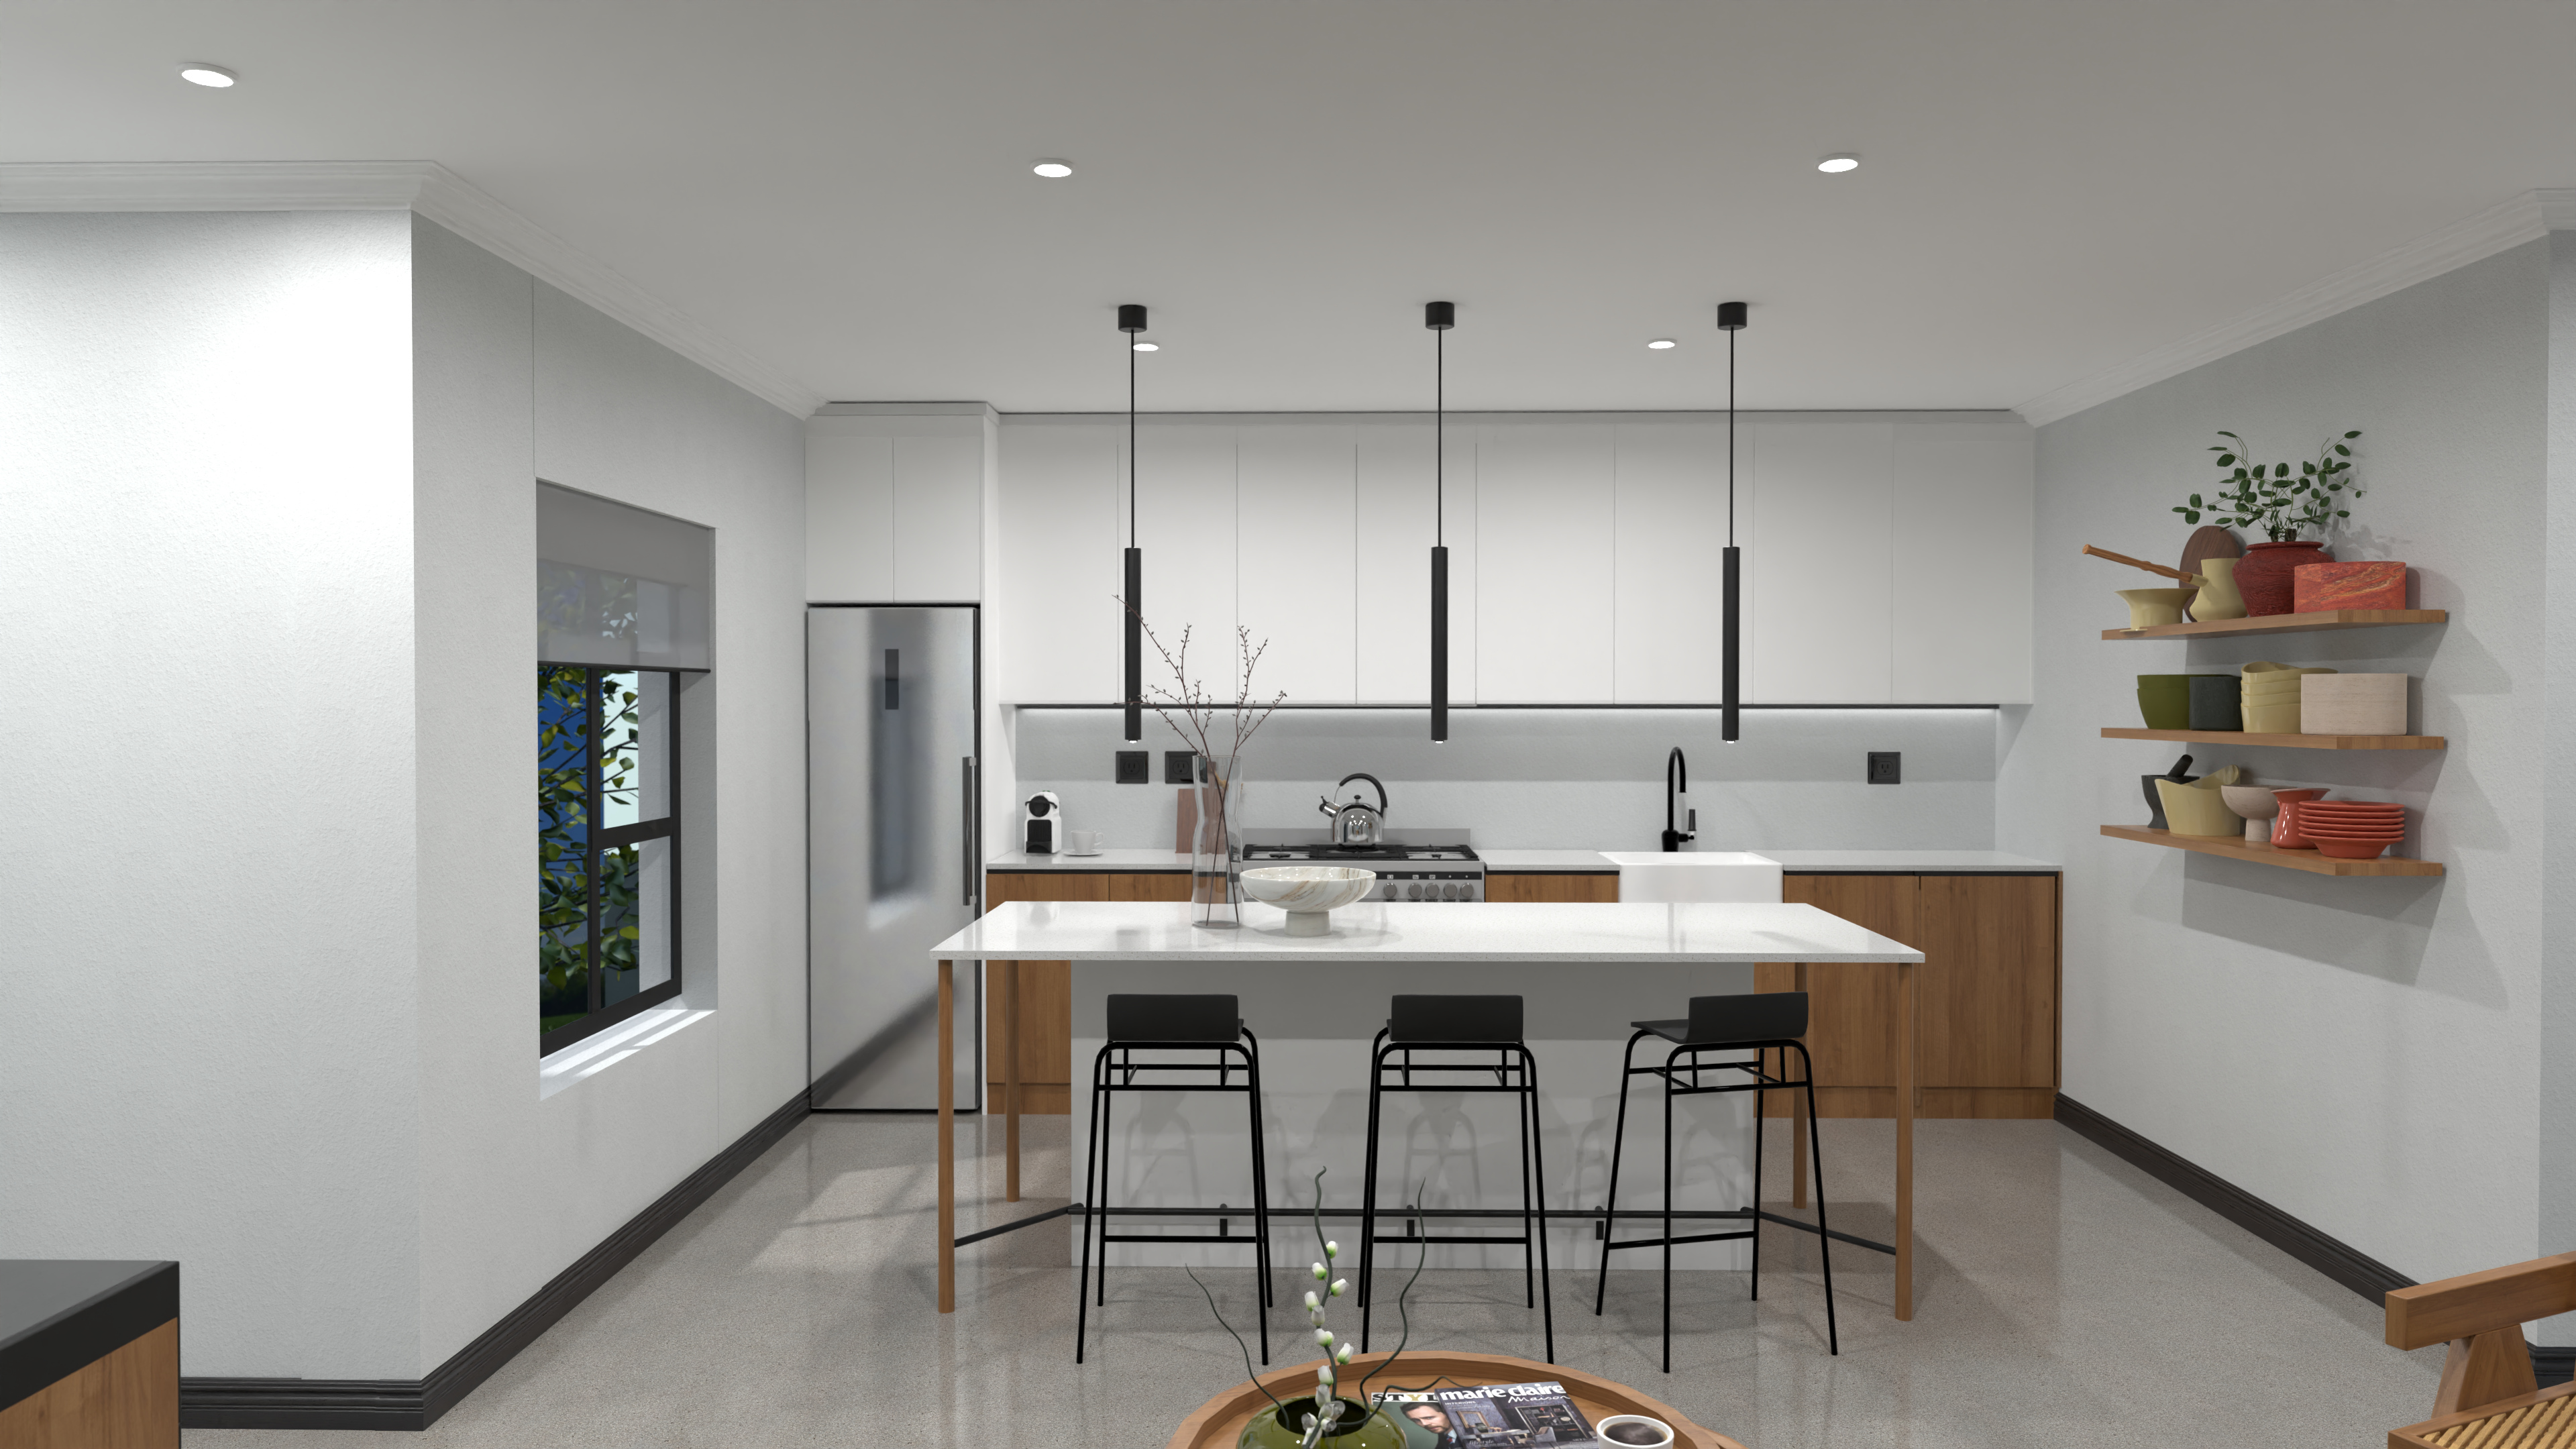 4K Contemporary Kitchen Render 10354216 by Candice Nero image